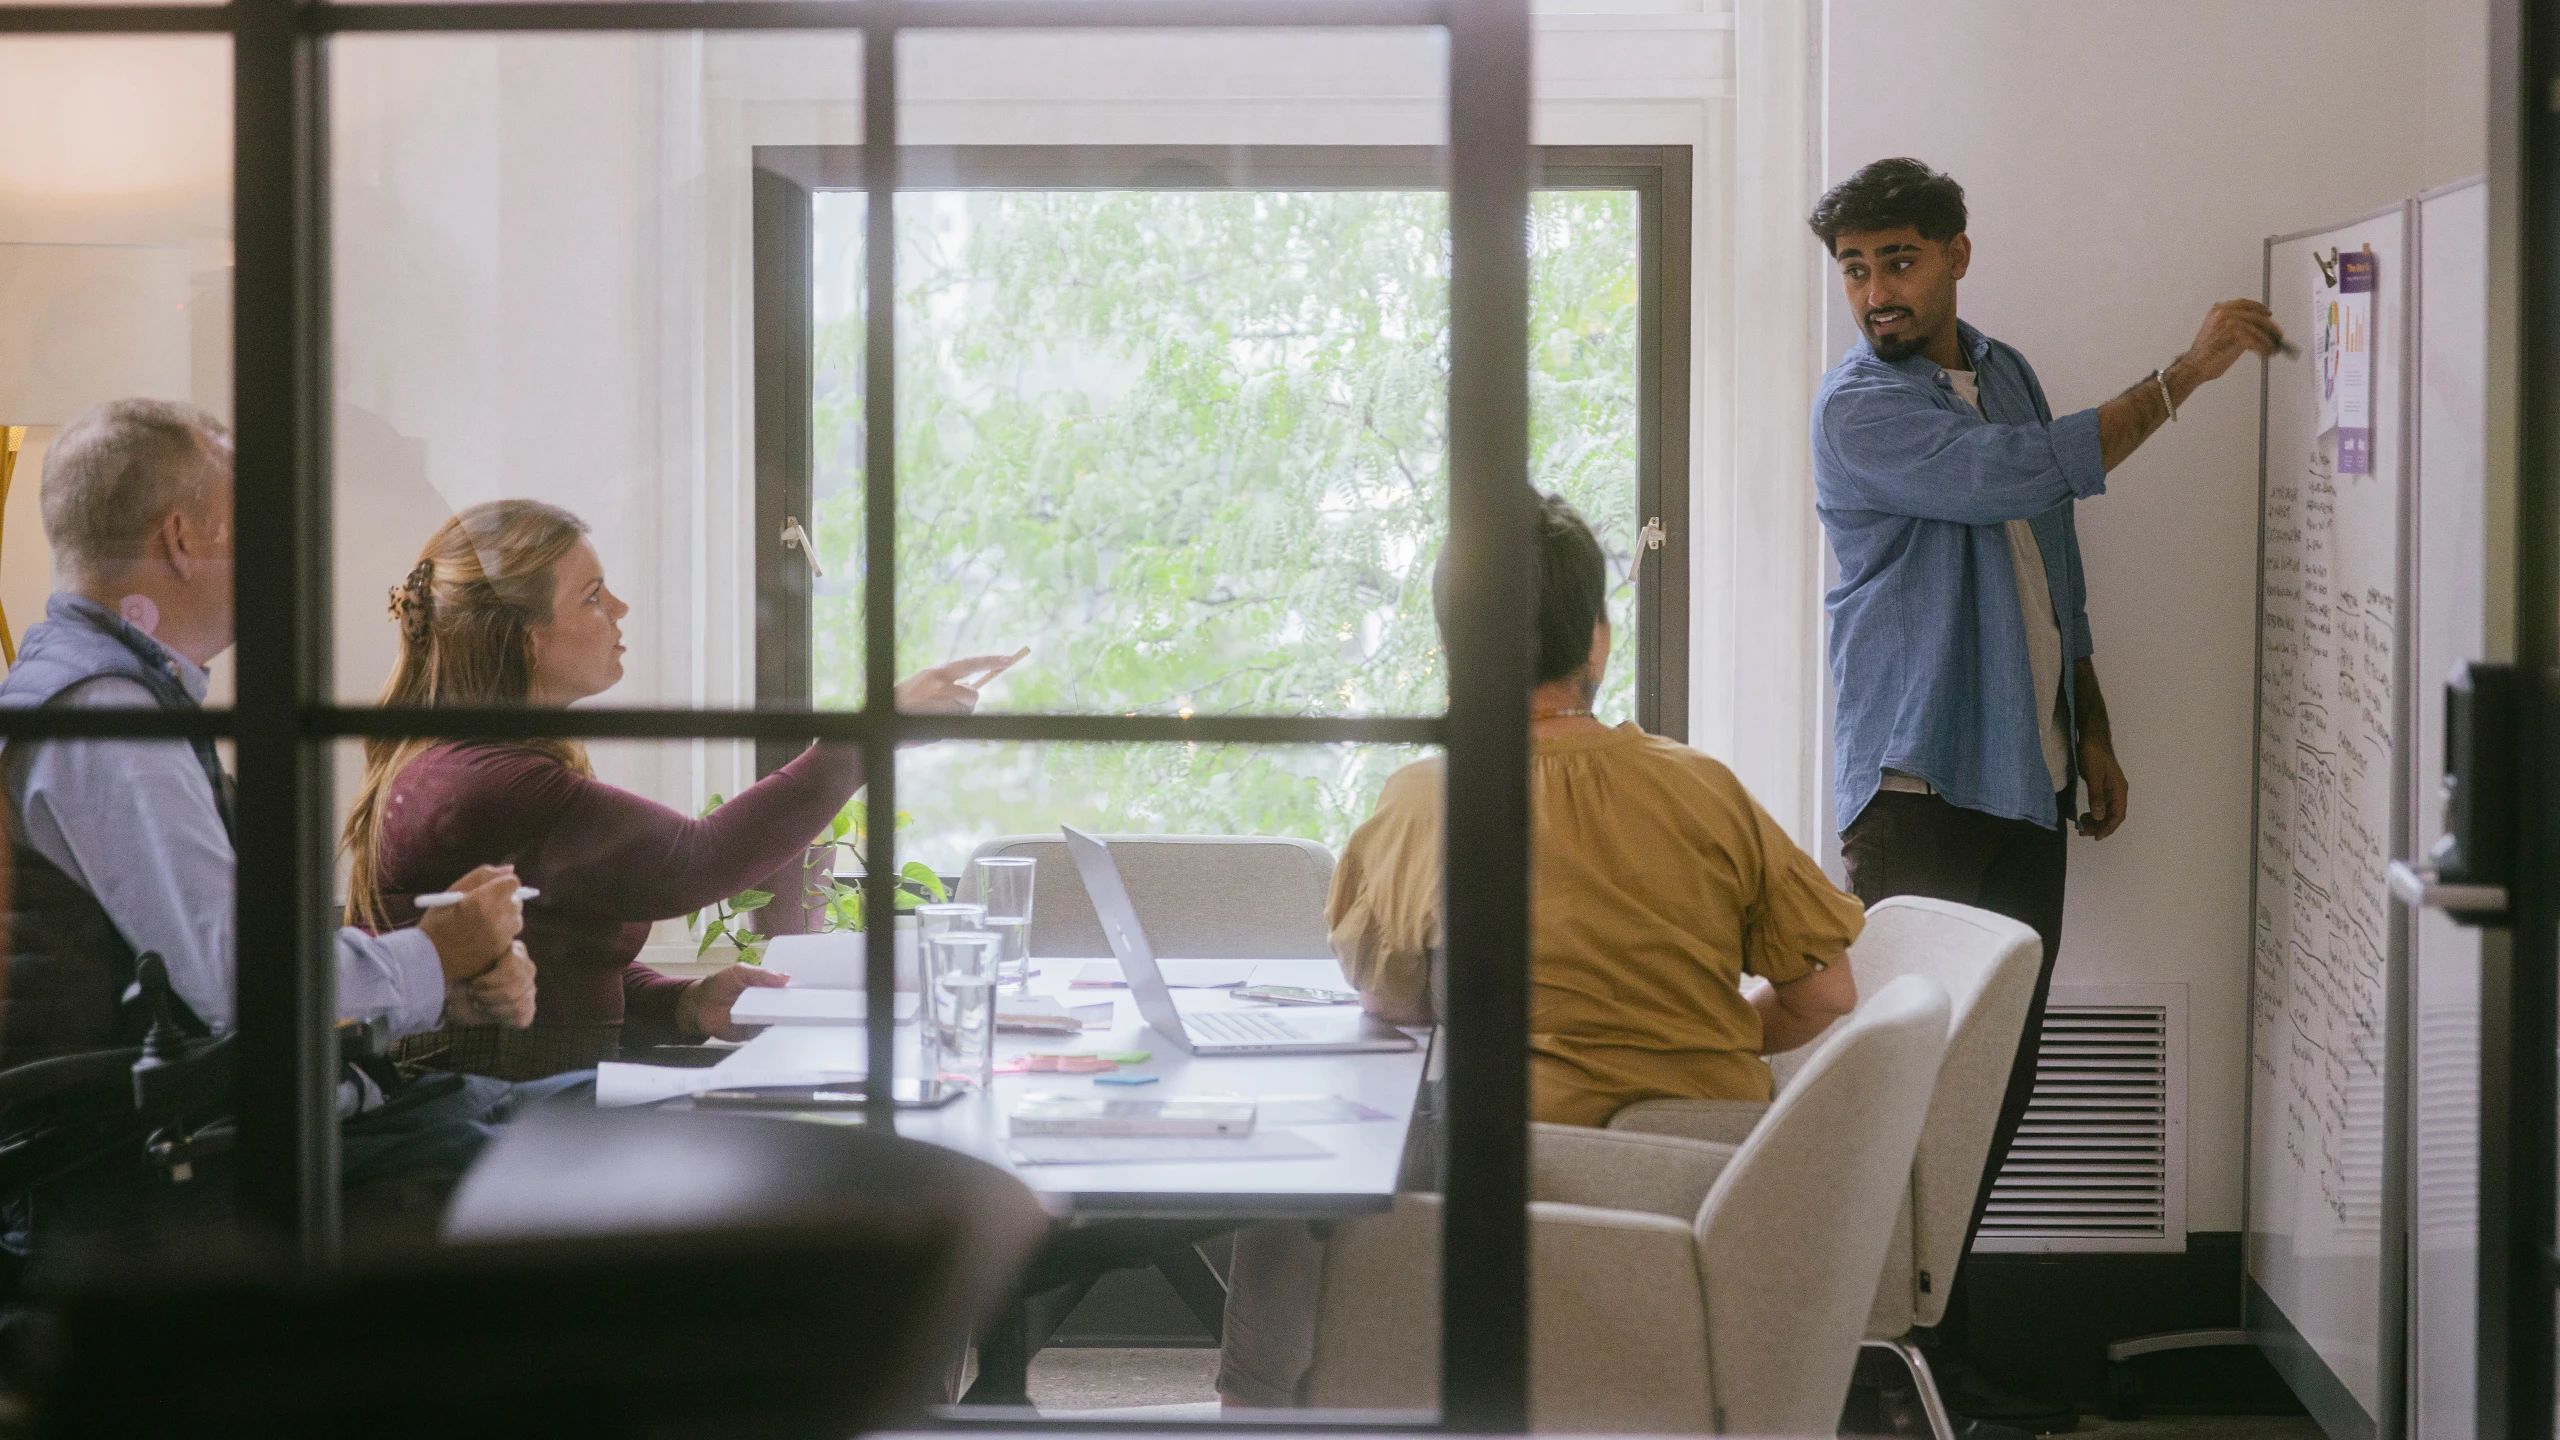 Vervint employees in a conference room working together. One employee is standing at a whiteboard while three others sit at the conference table in deep discussion. 